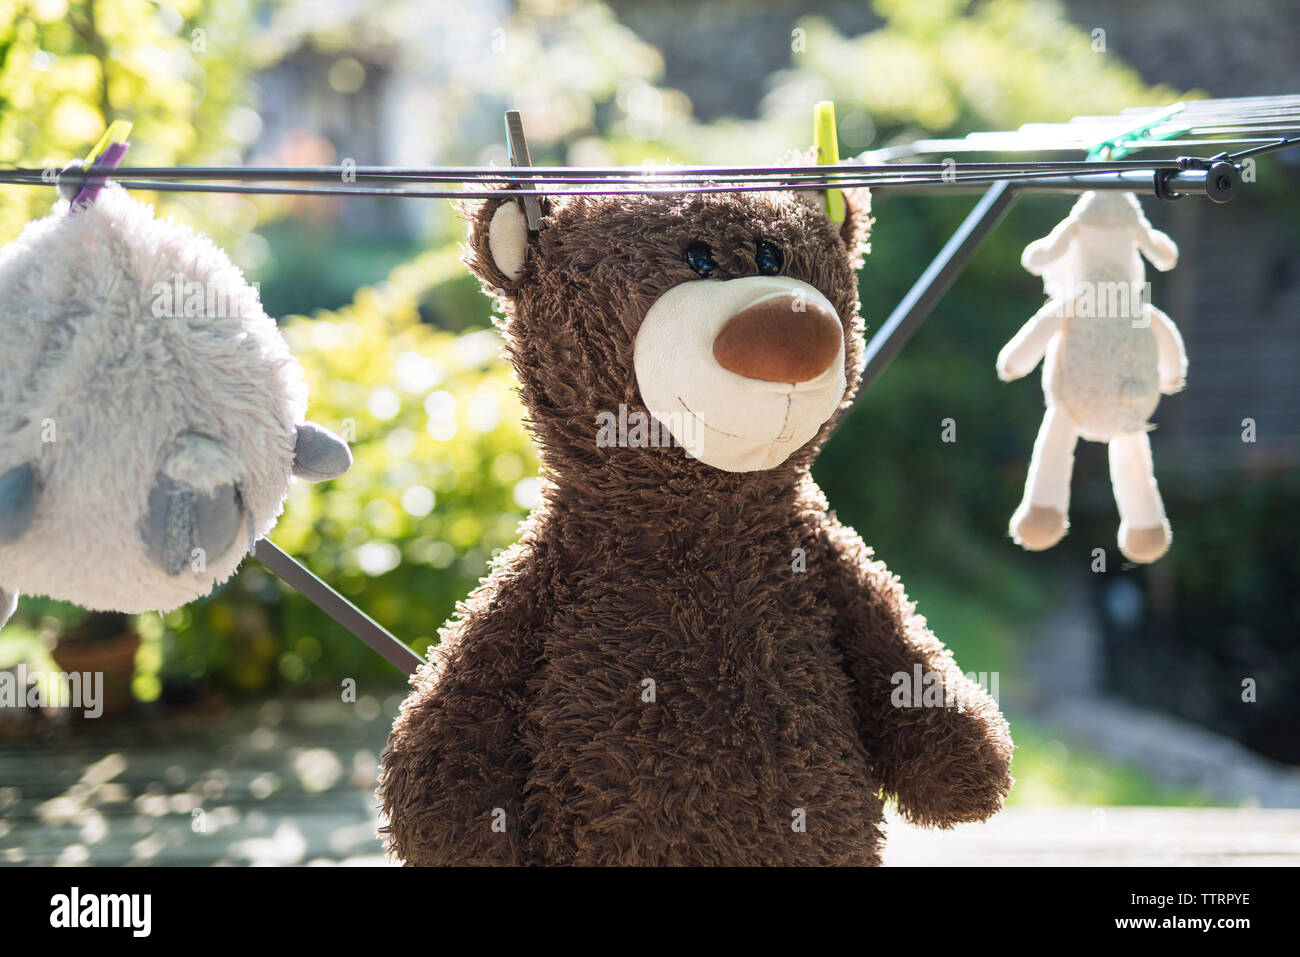 Close-up of stuffed toys hanging on clothesline Stock Photo